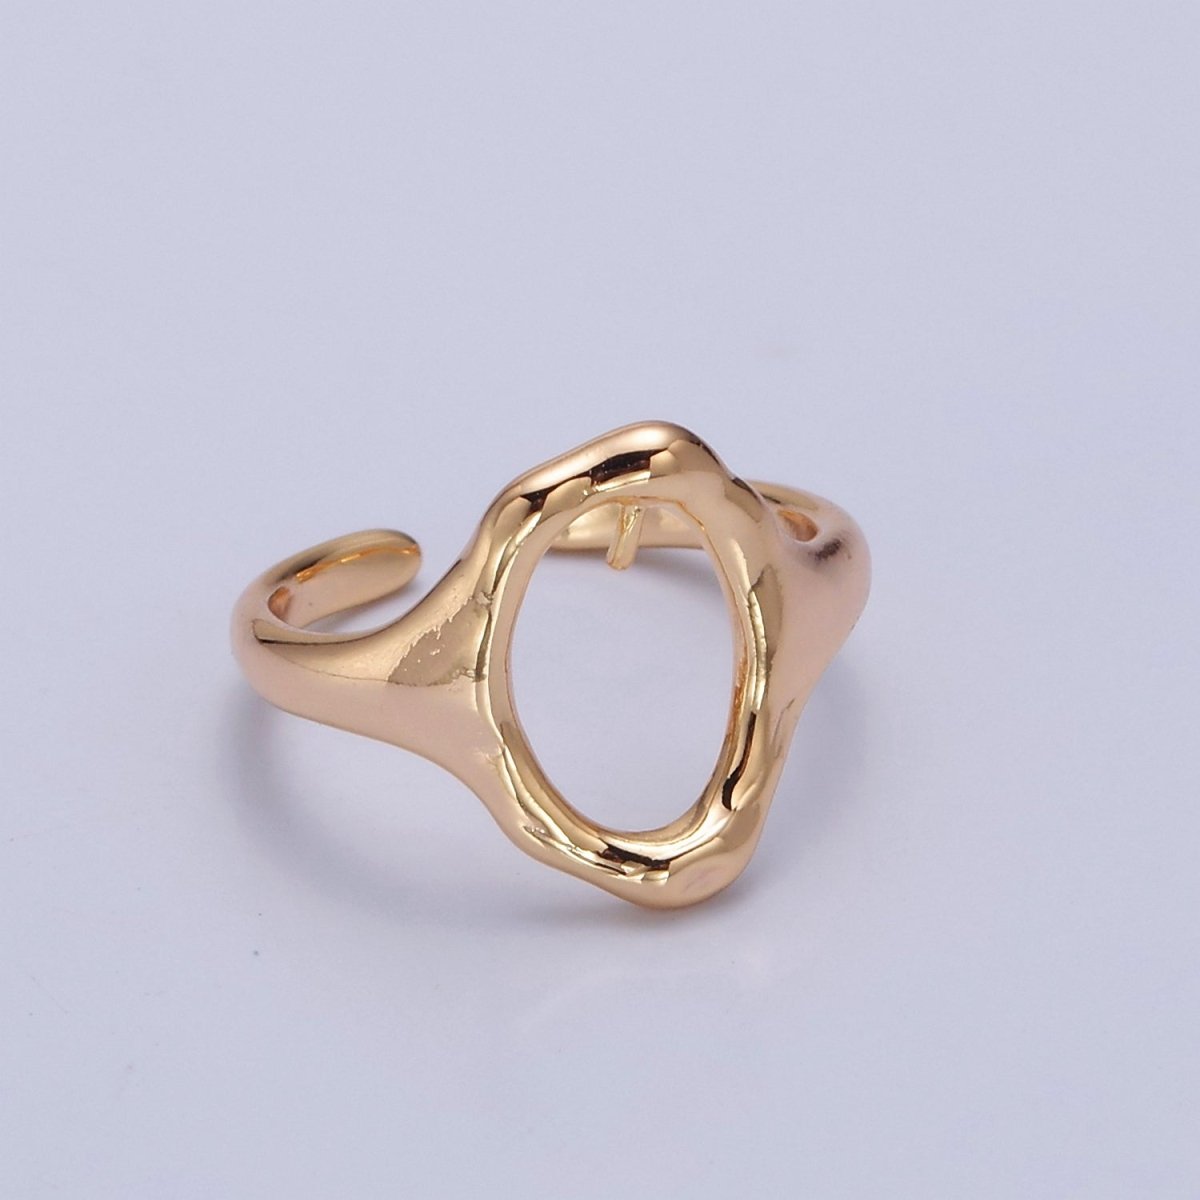 OS Hammered oval ring in Gold Large oval ring for women. Minimalist and modern Jewelry L-759 - DLUXCA